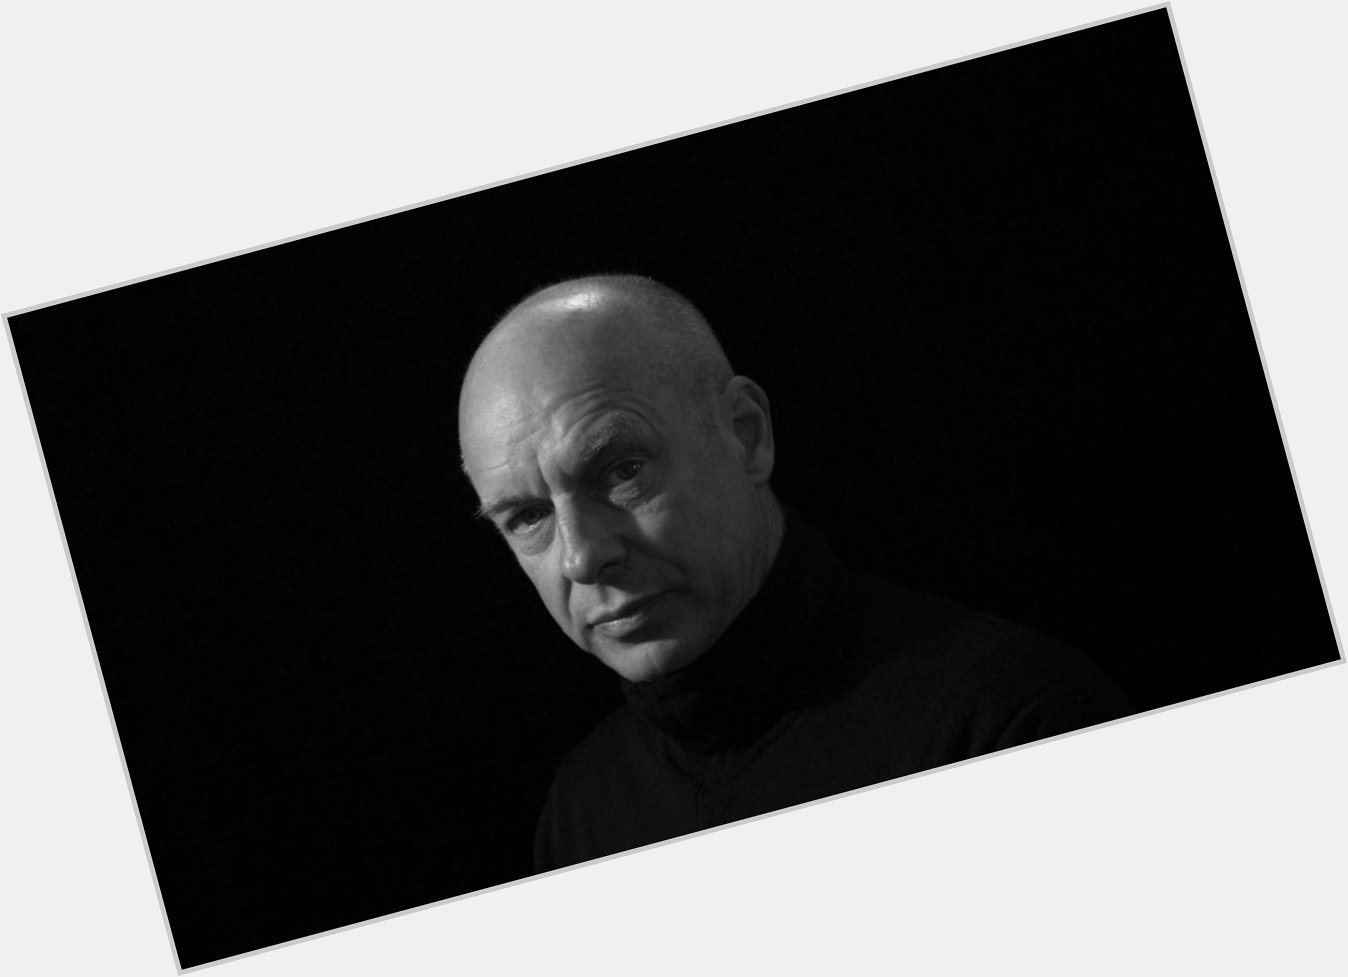 Happy birthday to Brian Eno, who is 69 today! 